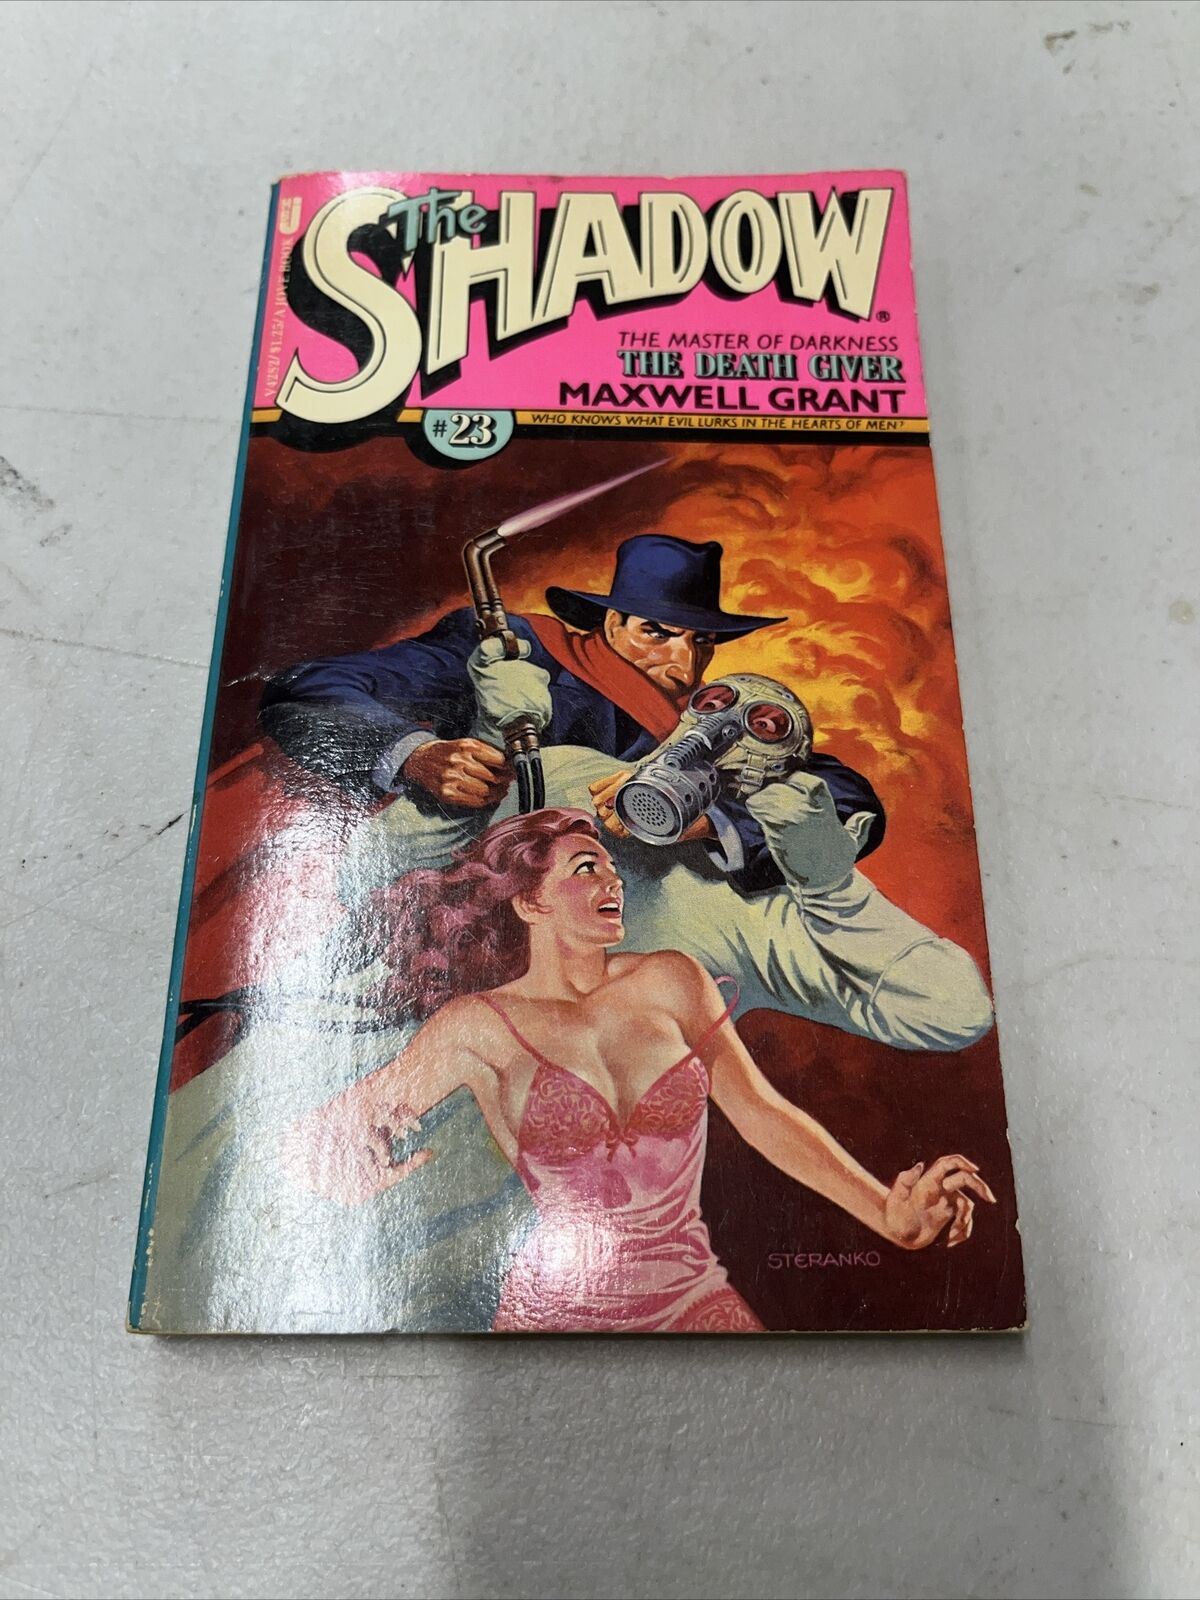 The Shadow # 23 